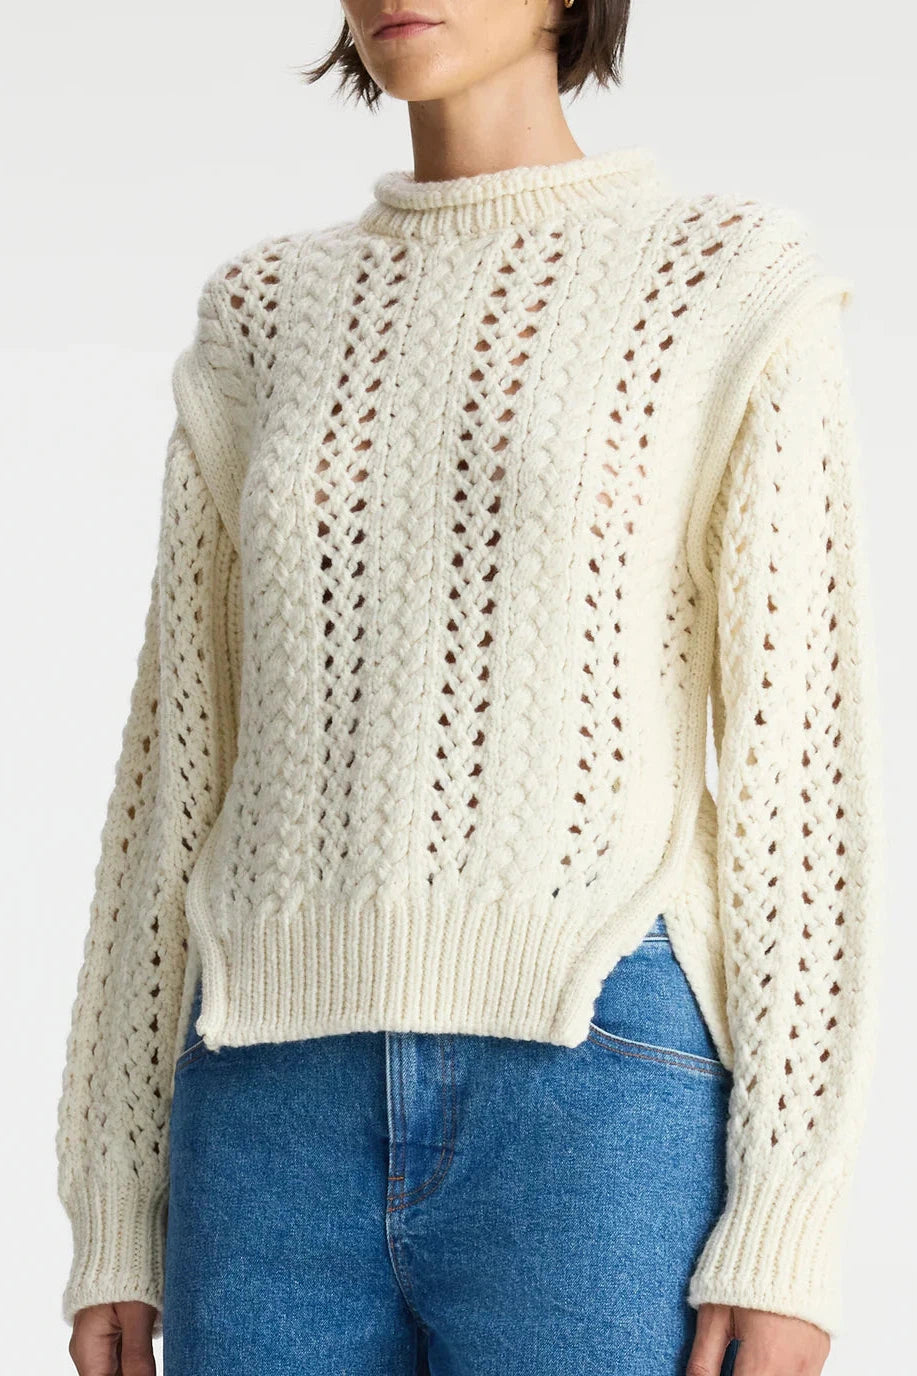 A.L.C. CHANDLER WOOL SWEATER IN OFF WHITE